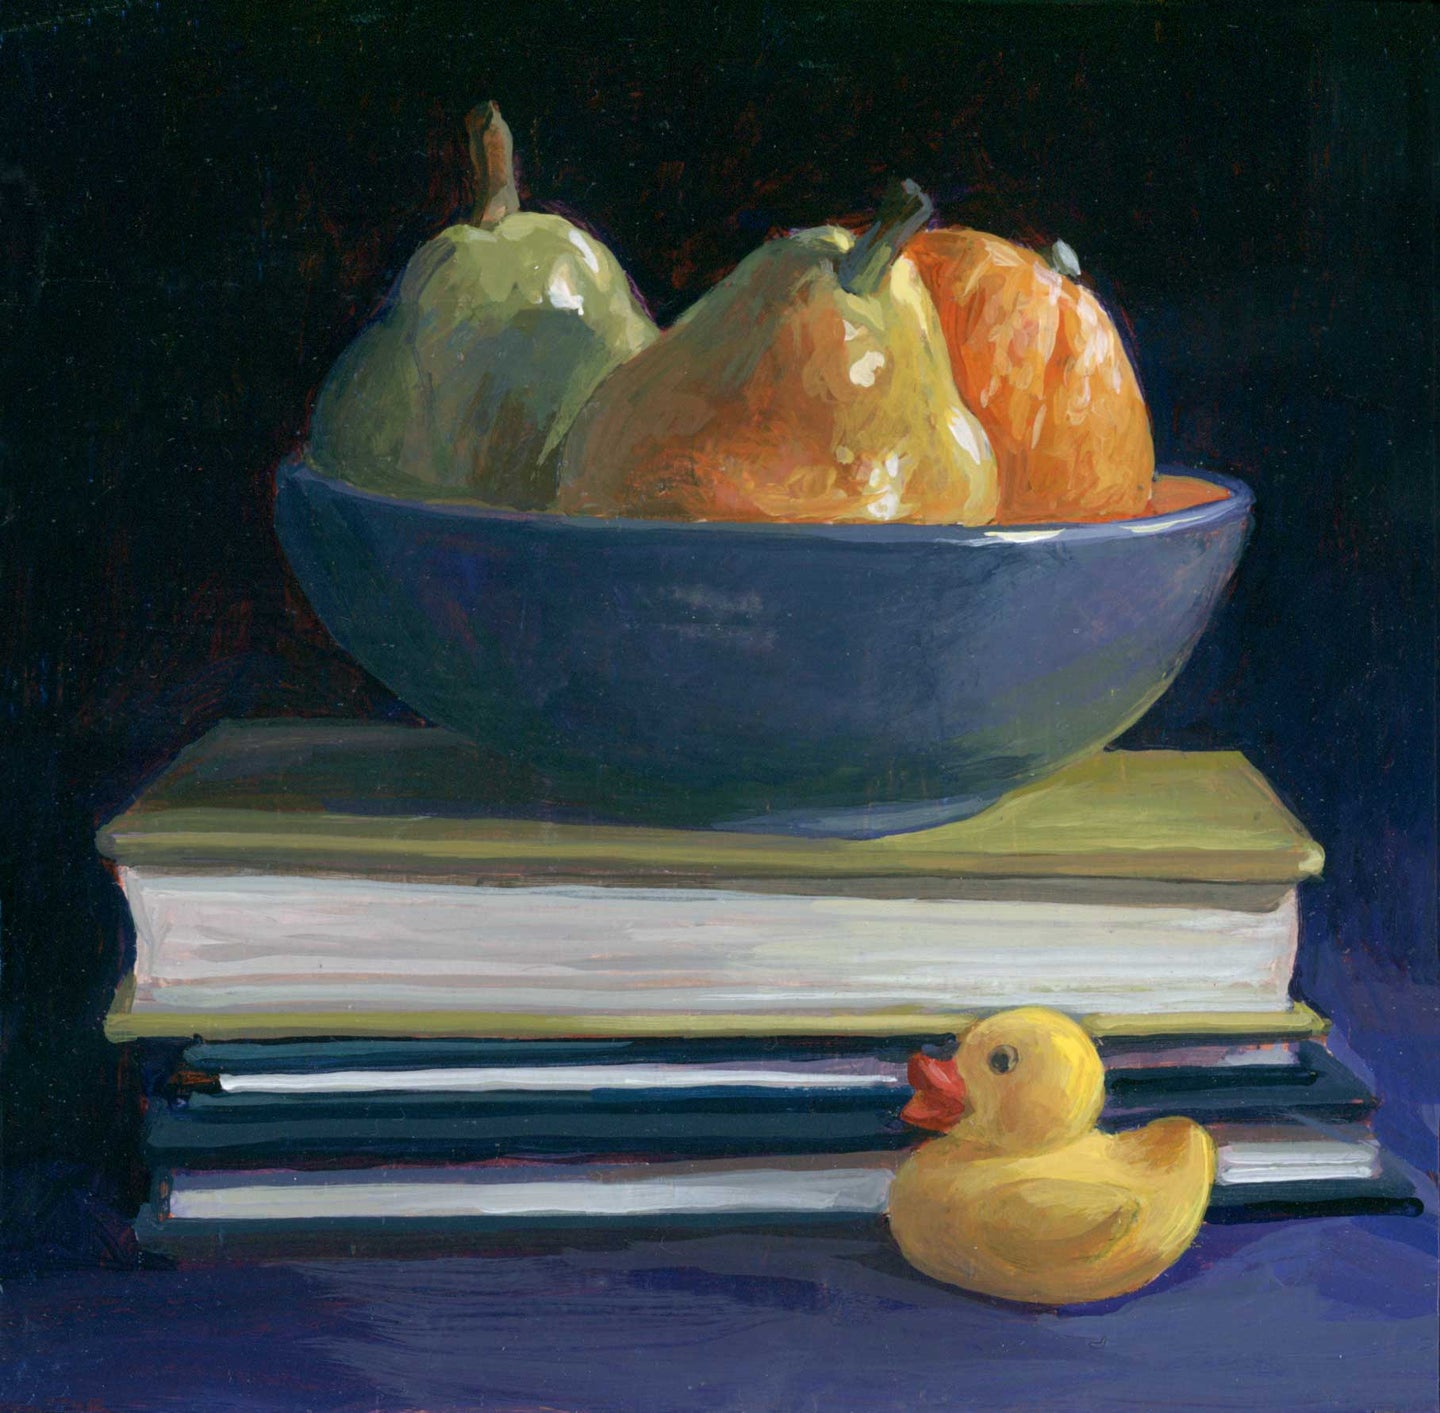 88. Pears, Books and Rubber Ducky